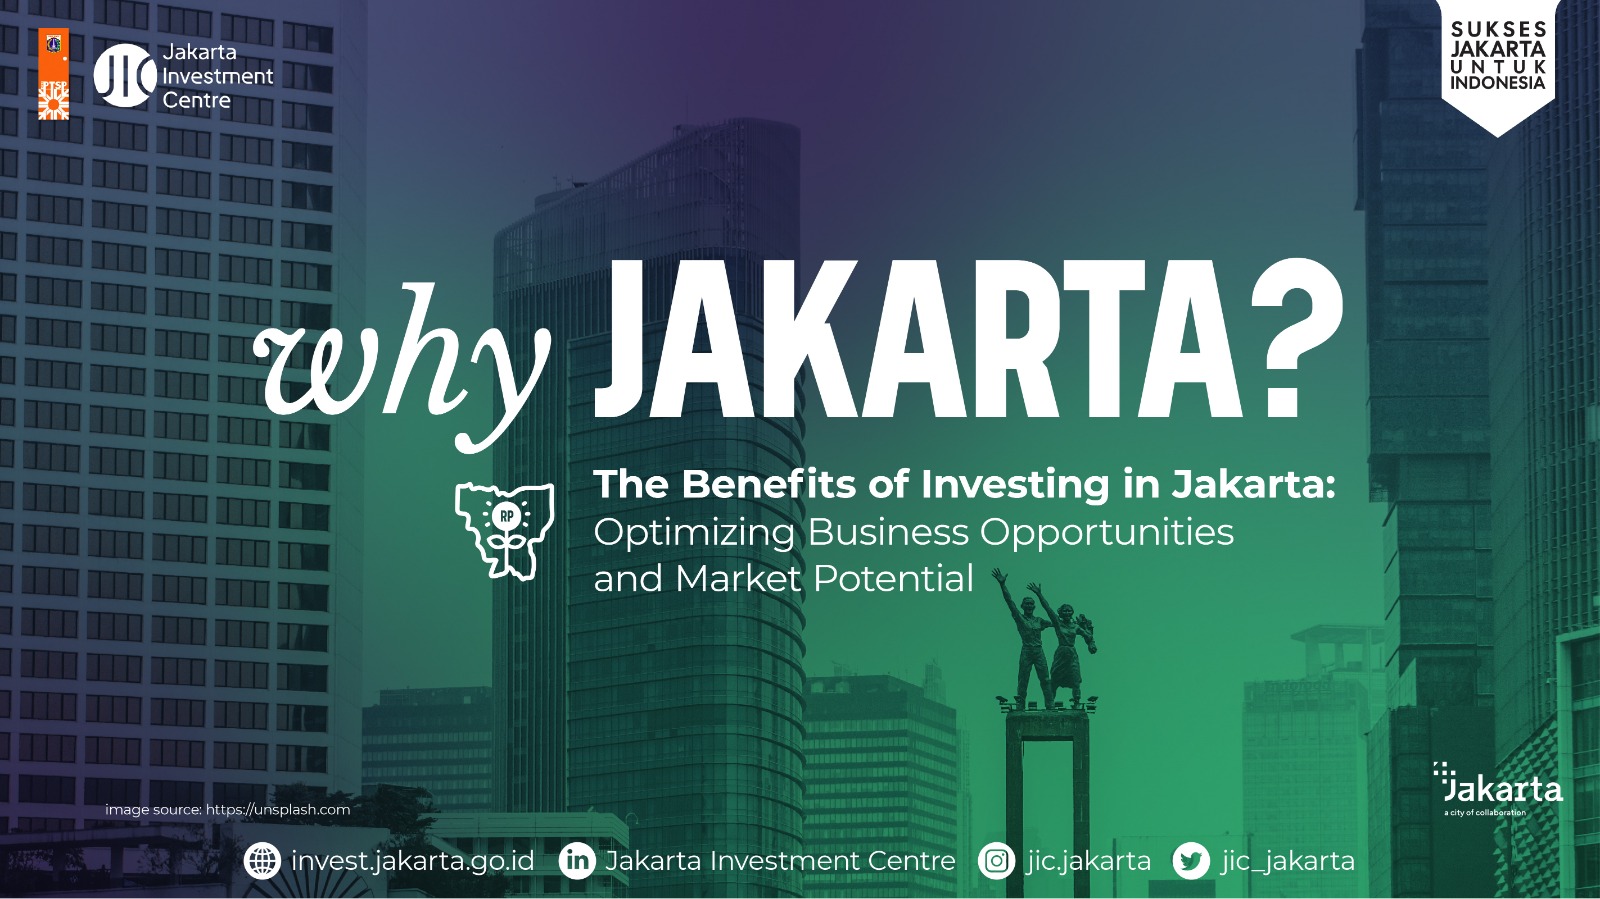 The Benefits of Investing in Jakarta: Optimizing Business Opportunities and Market Potential